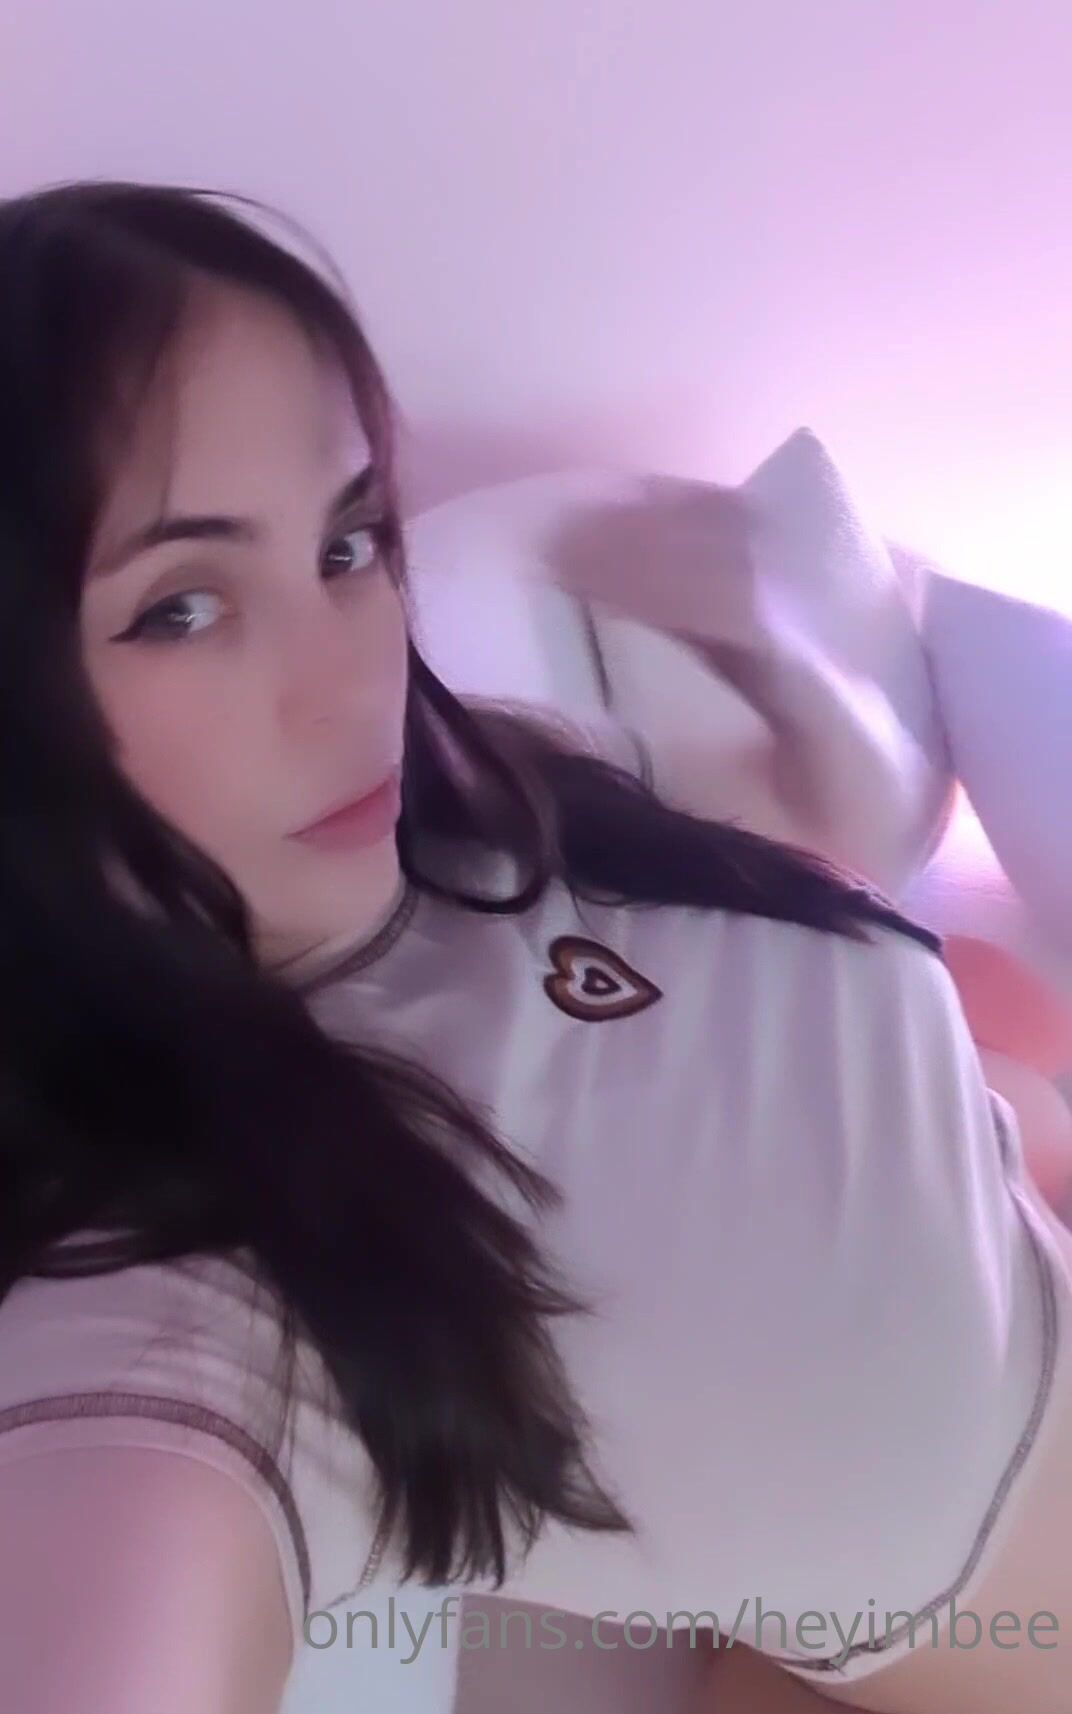 Bee onlyfans video